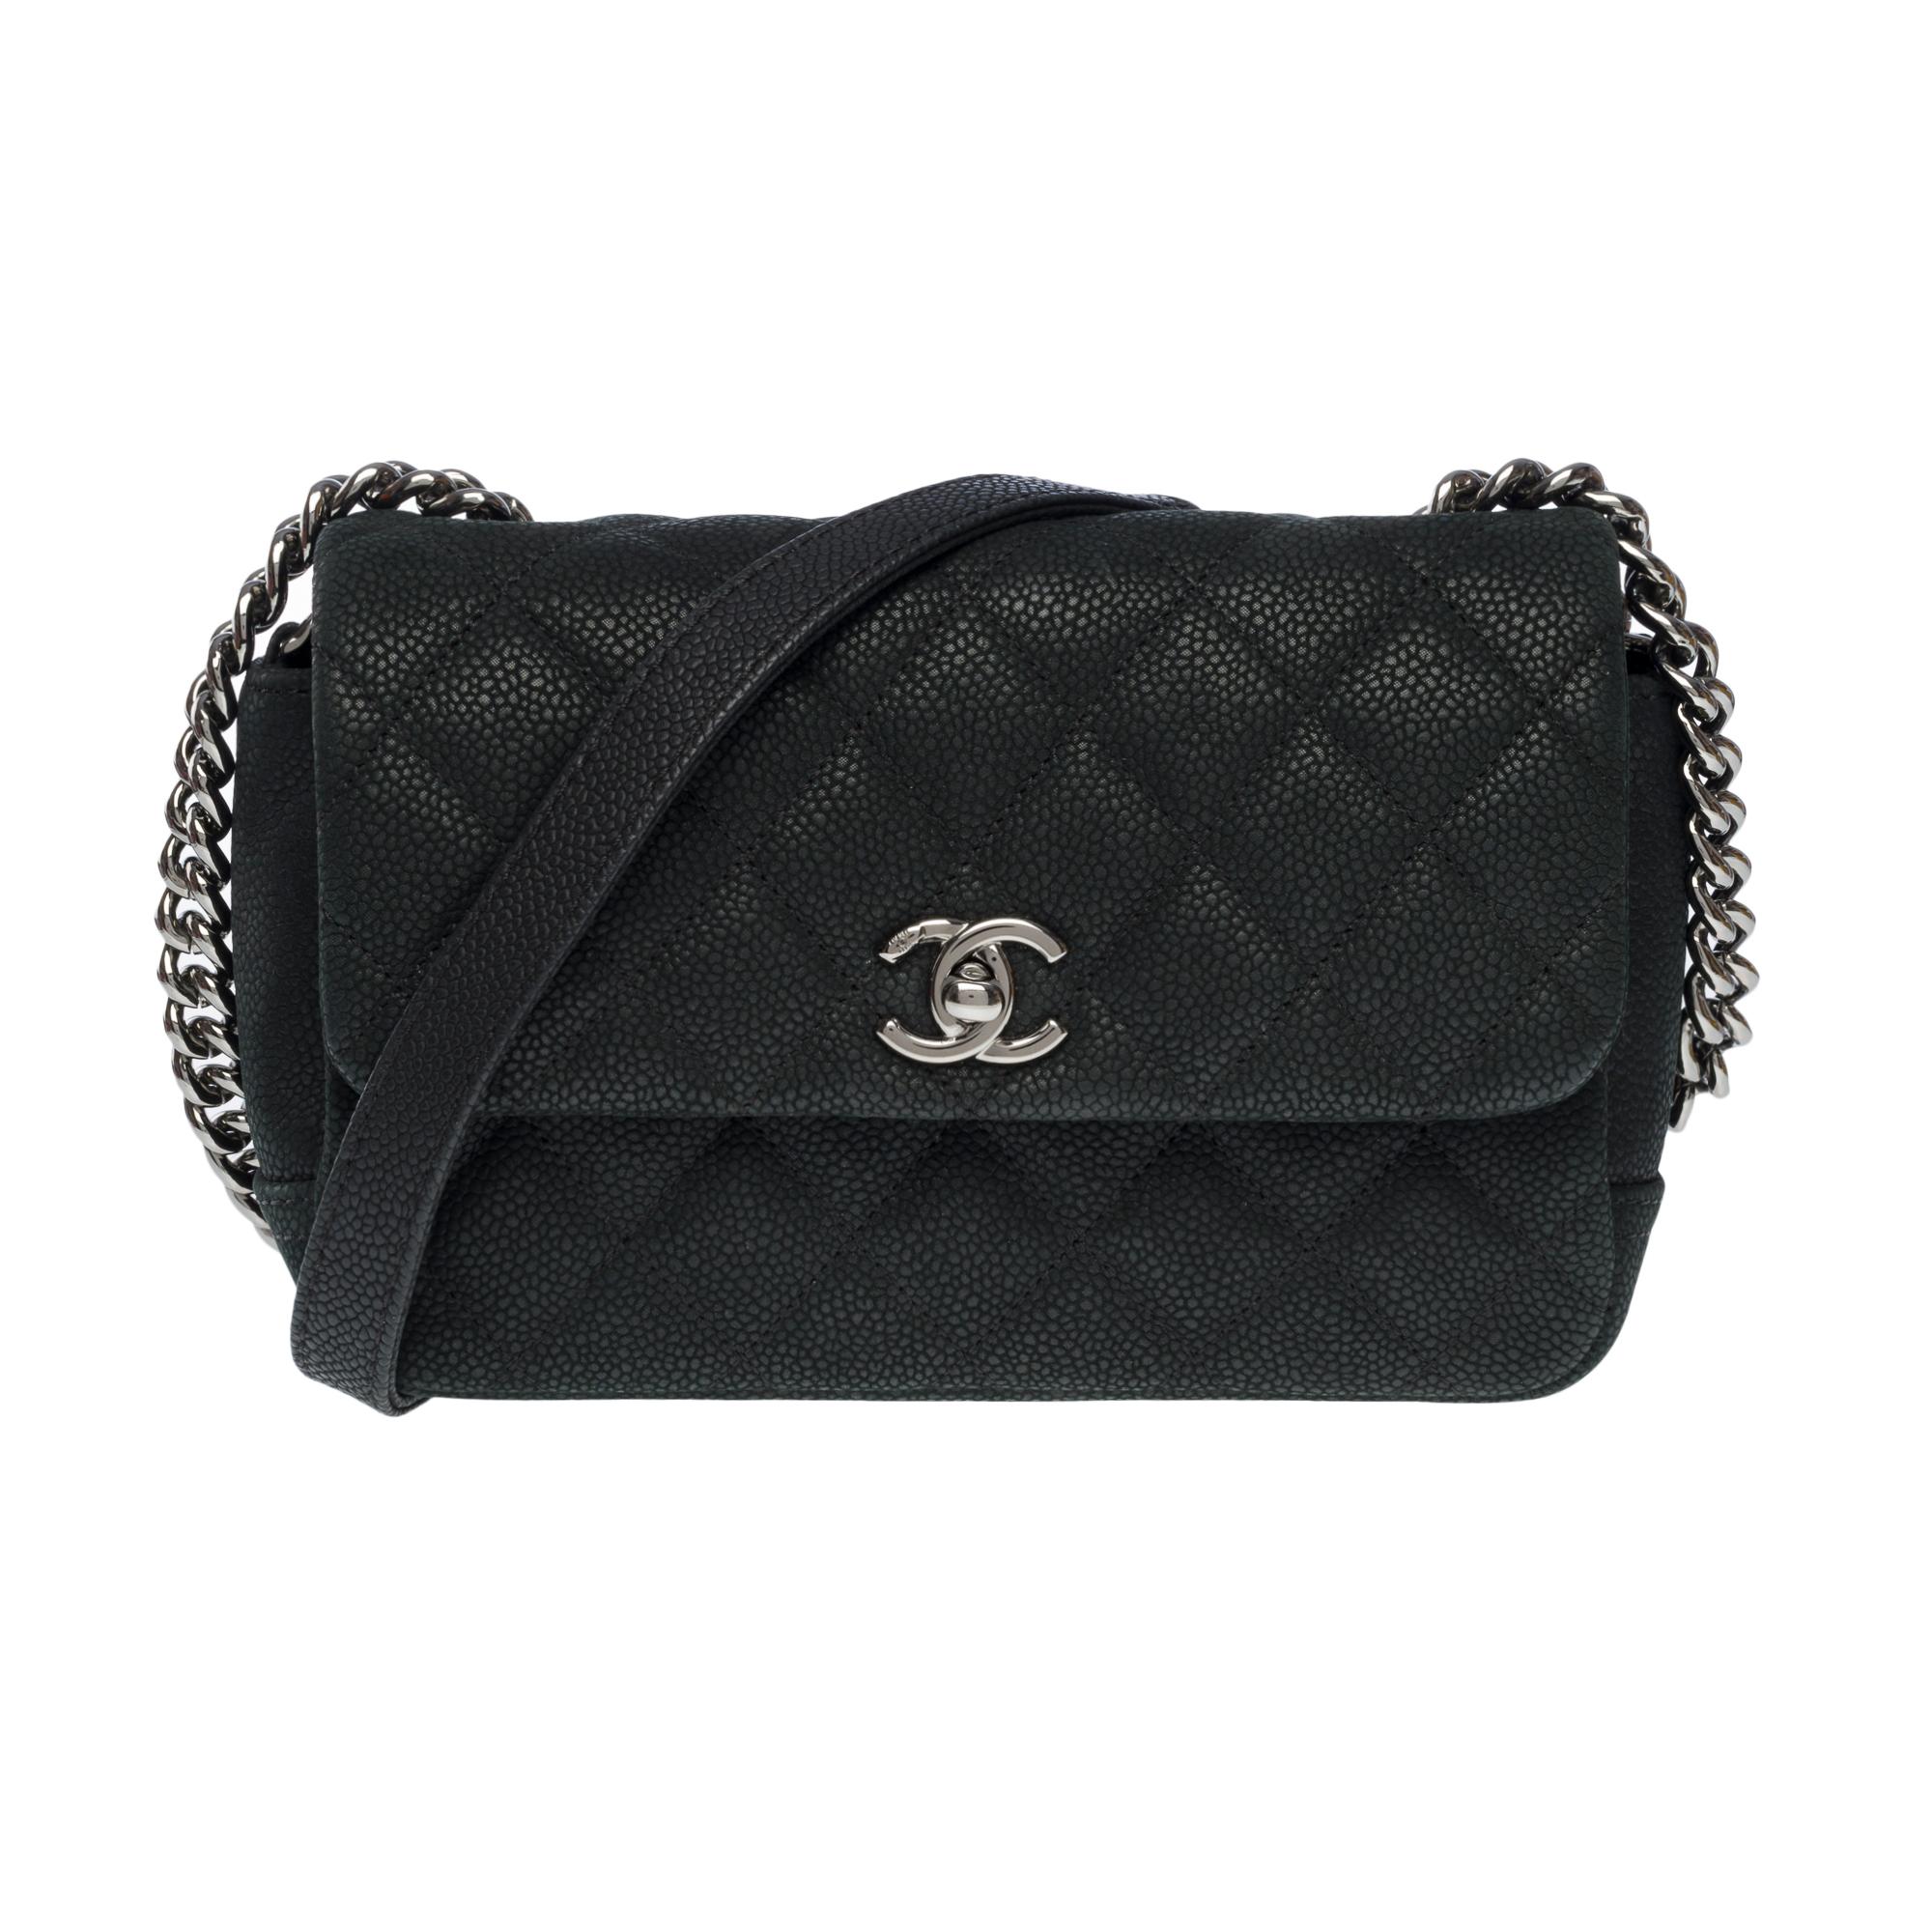 Amazing Chanel Timeless/Classic Mini rectangular flap shoulder bag in black quilted caviar leather, silver metal hardware, silver metal chain handle interlaced with black leather allowing a shoulder or crossbody carry

Single flap 
Flap